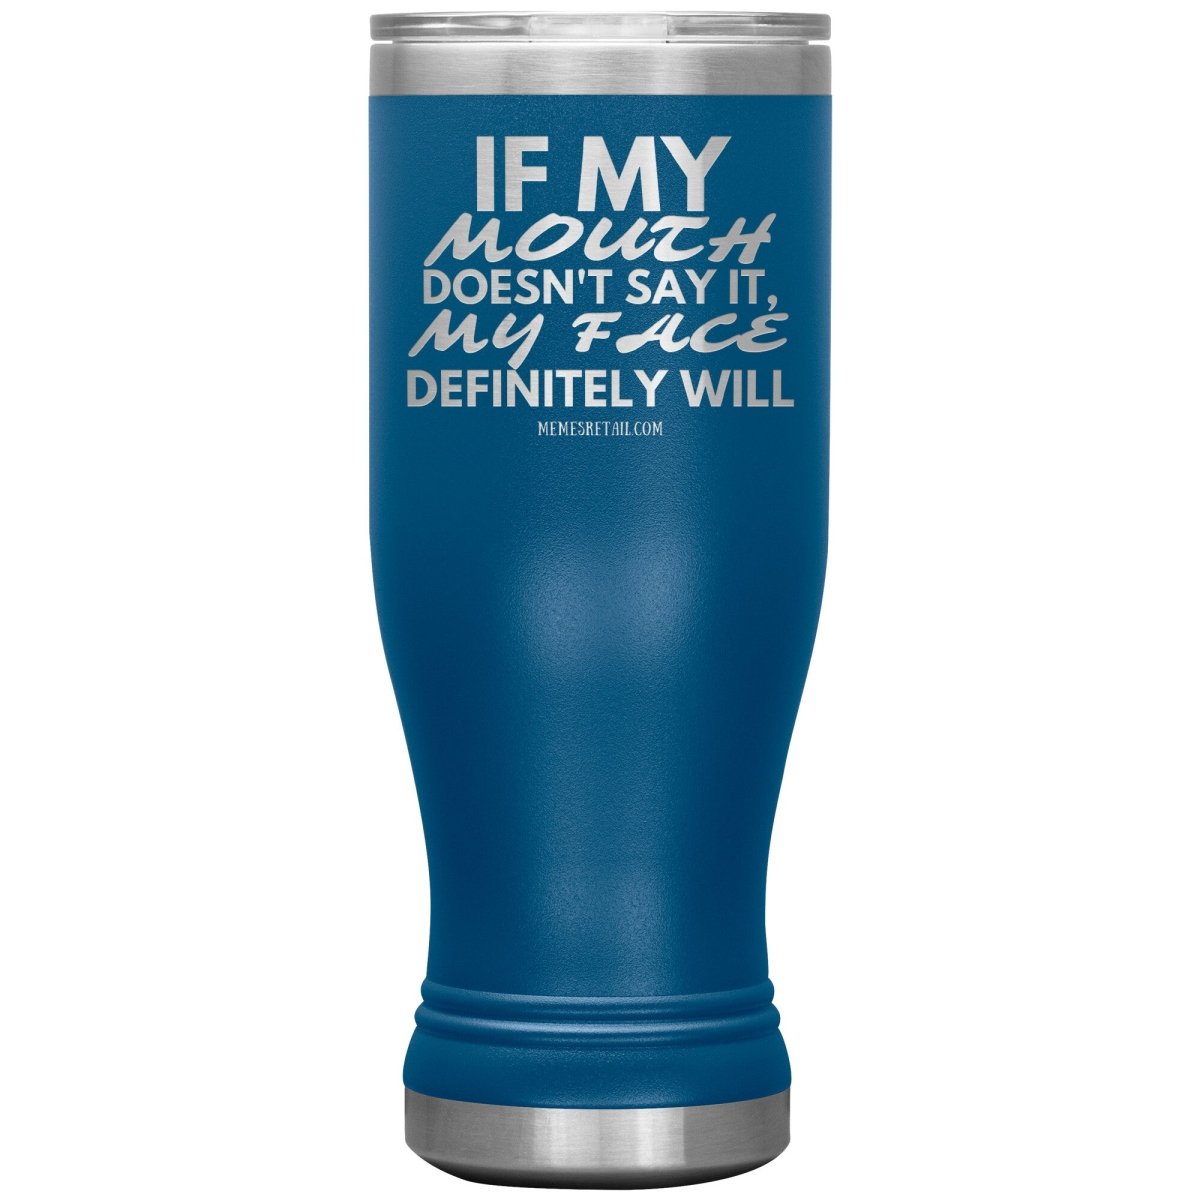 If my mouth doesn't say it, my face definitely will Tumblers, 20oz BOHO Insulated Tumbler / Blue - MemesRetail.com